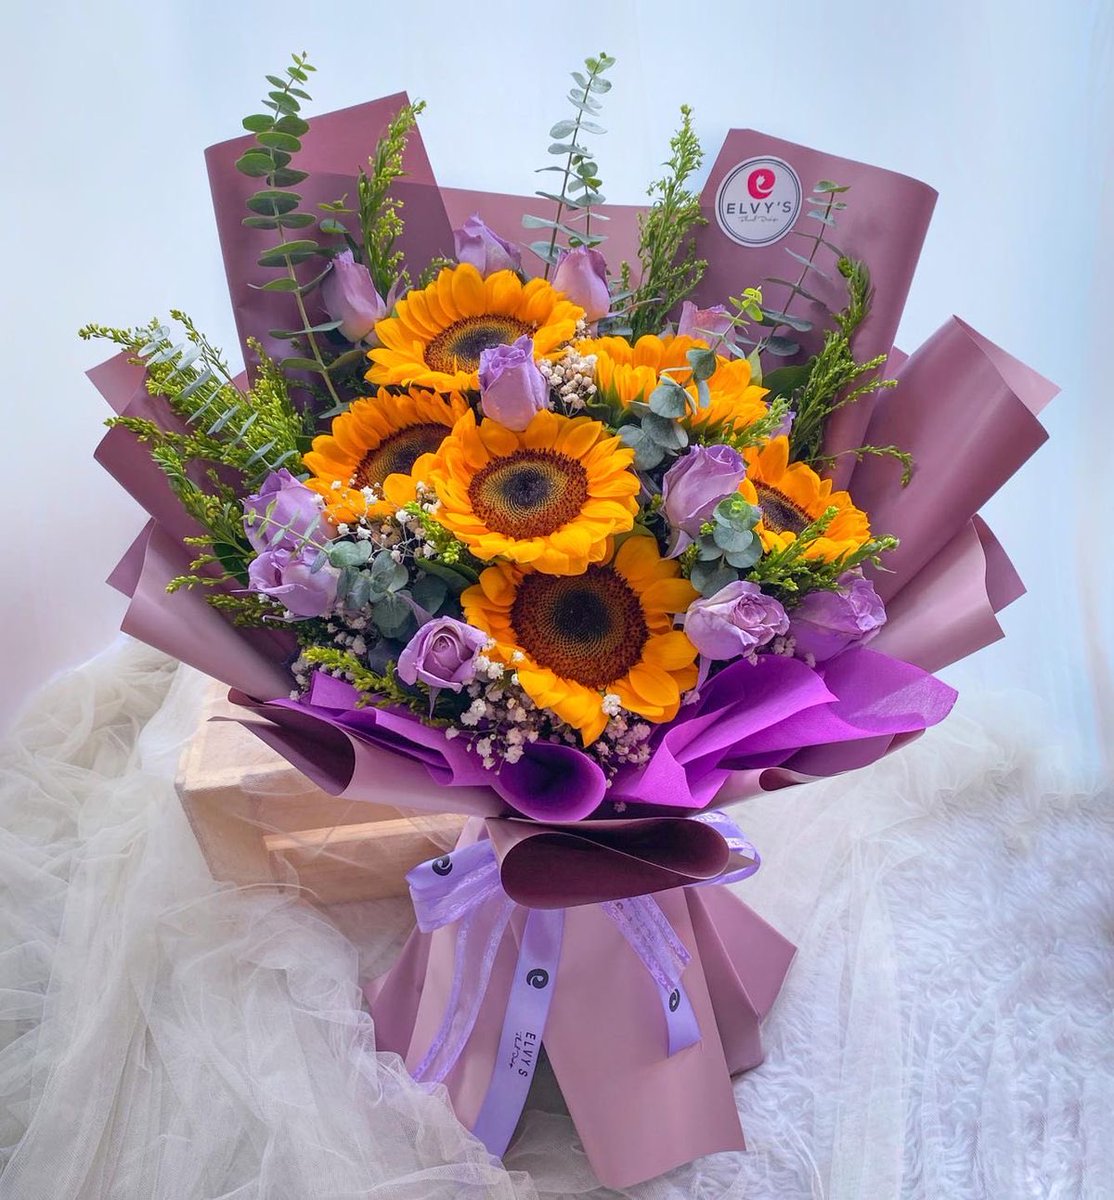 A burst of beauty with every bouquet. 💜